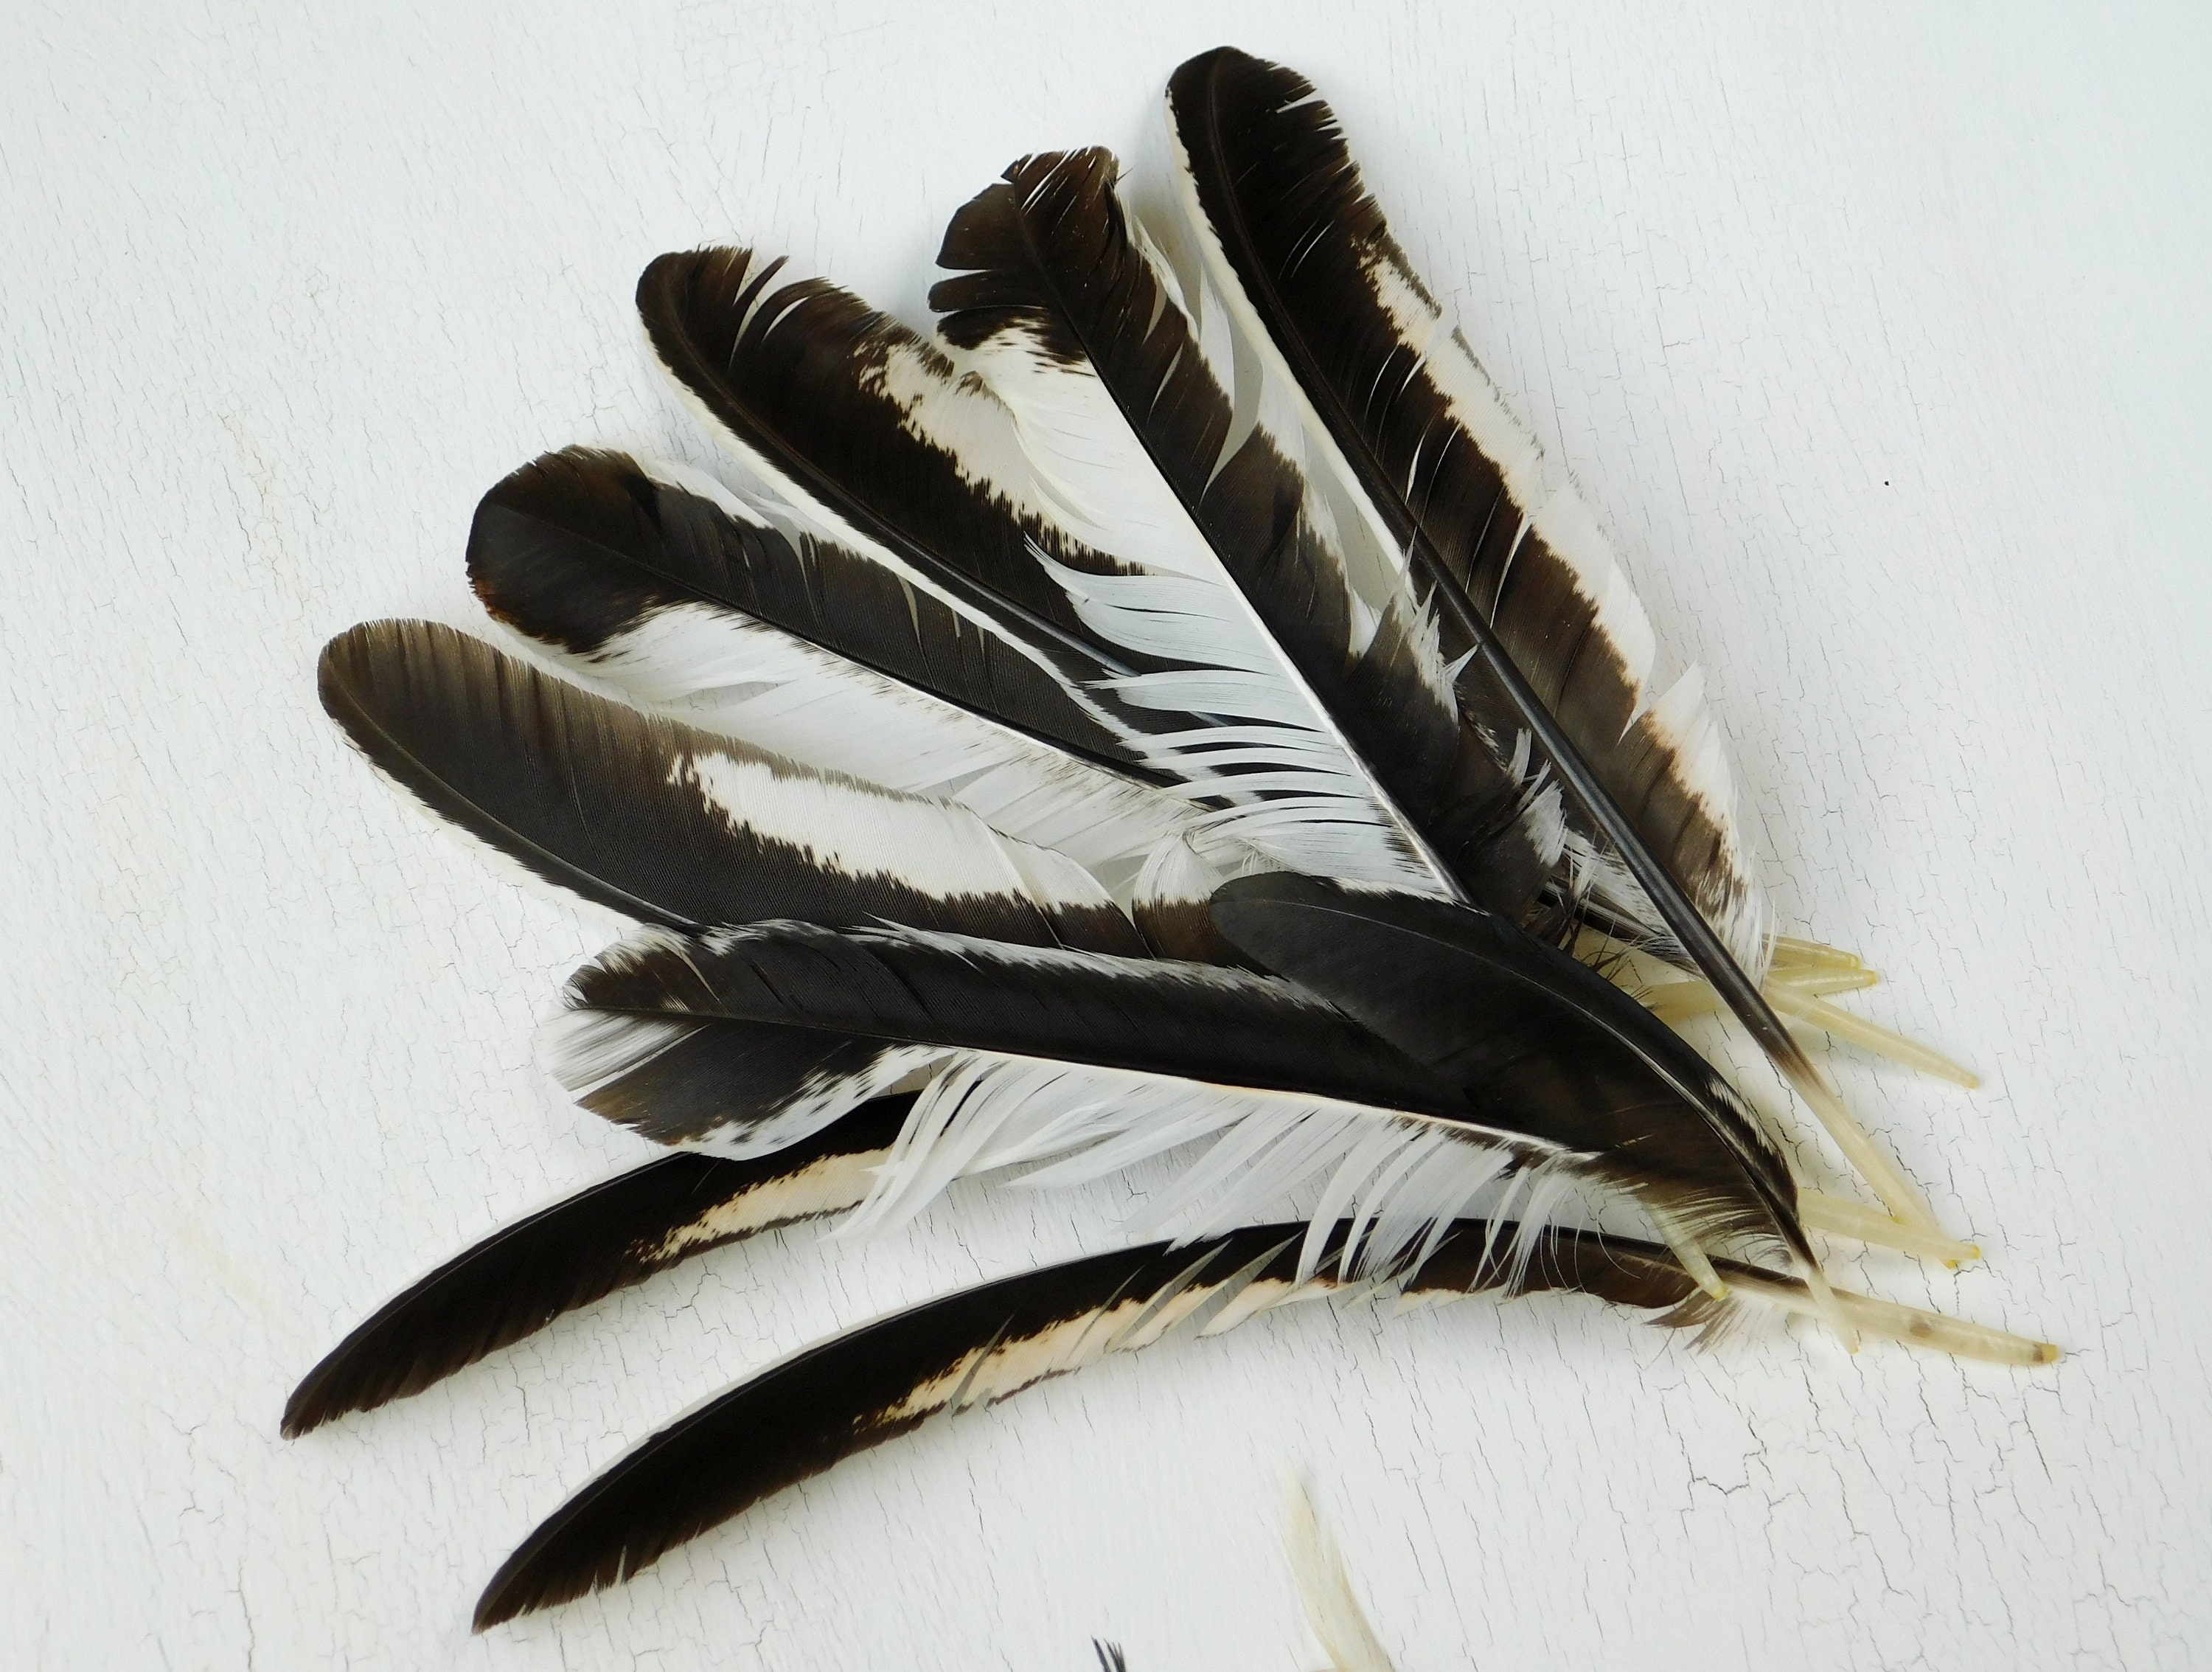 Duck Feather Assortment/cruelty Free Feathers/humane Craft Feathers/feathers  for Crafts/feathers for Hats/feathers for Hair/fly Tying/30 Ct. 